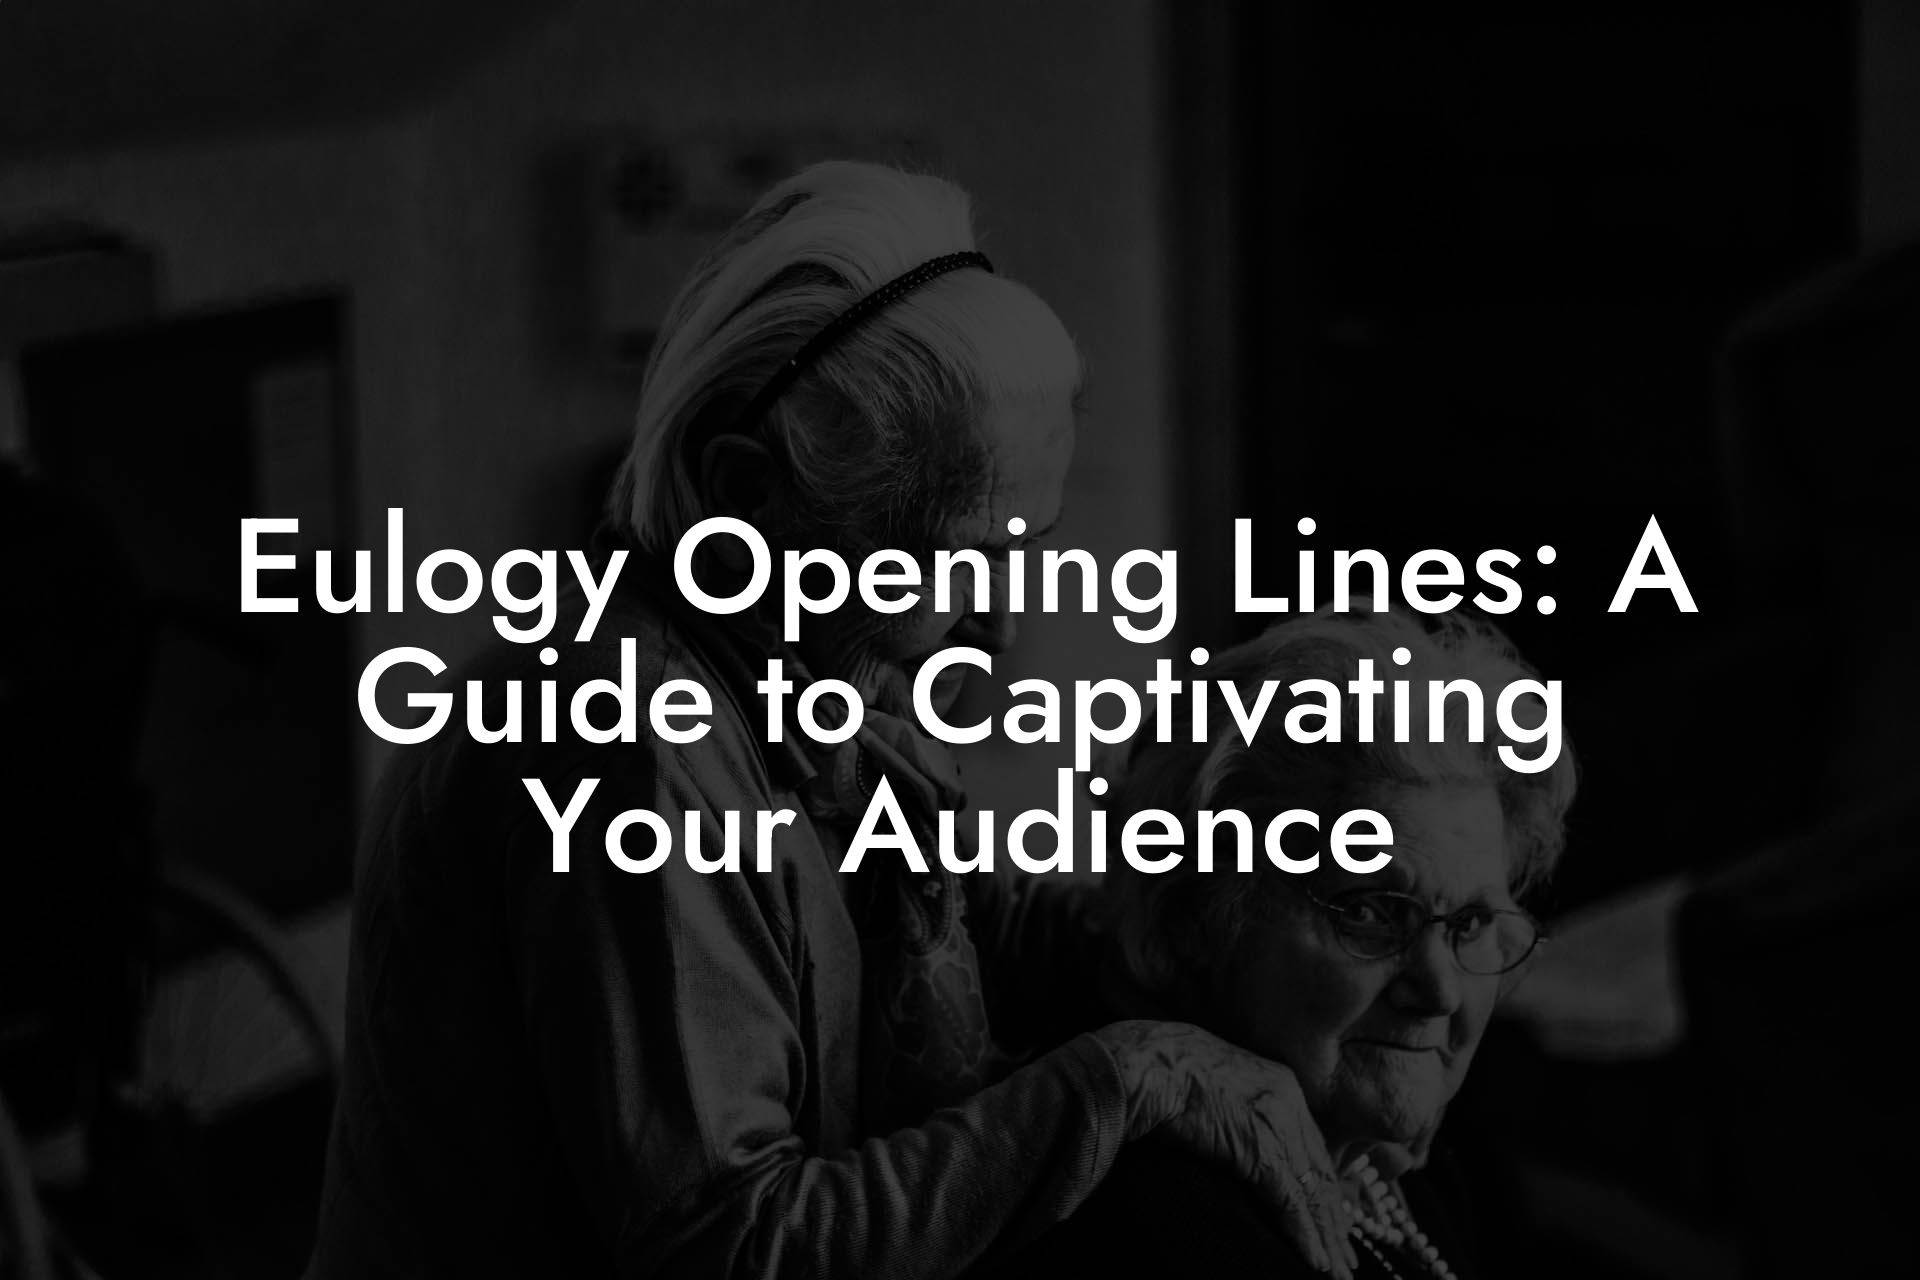 Eulogy Opening Lines: A Guide to Captivating Your Audience